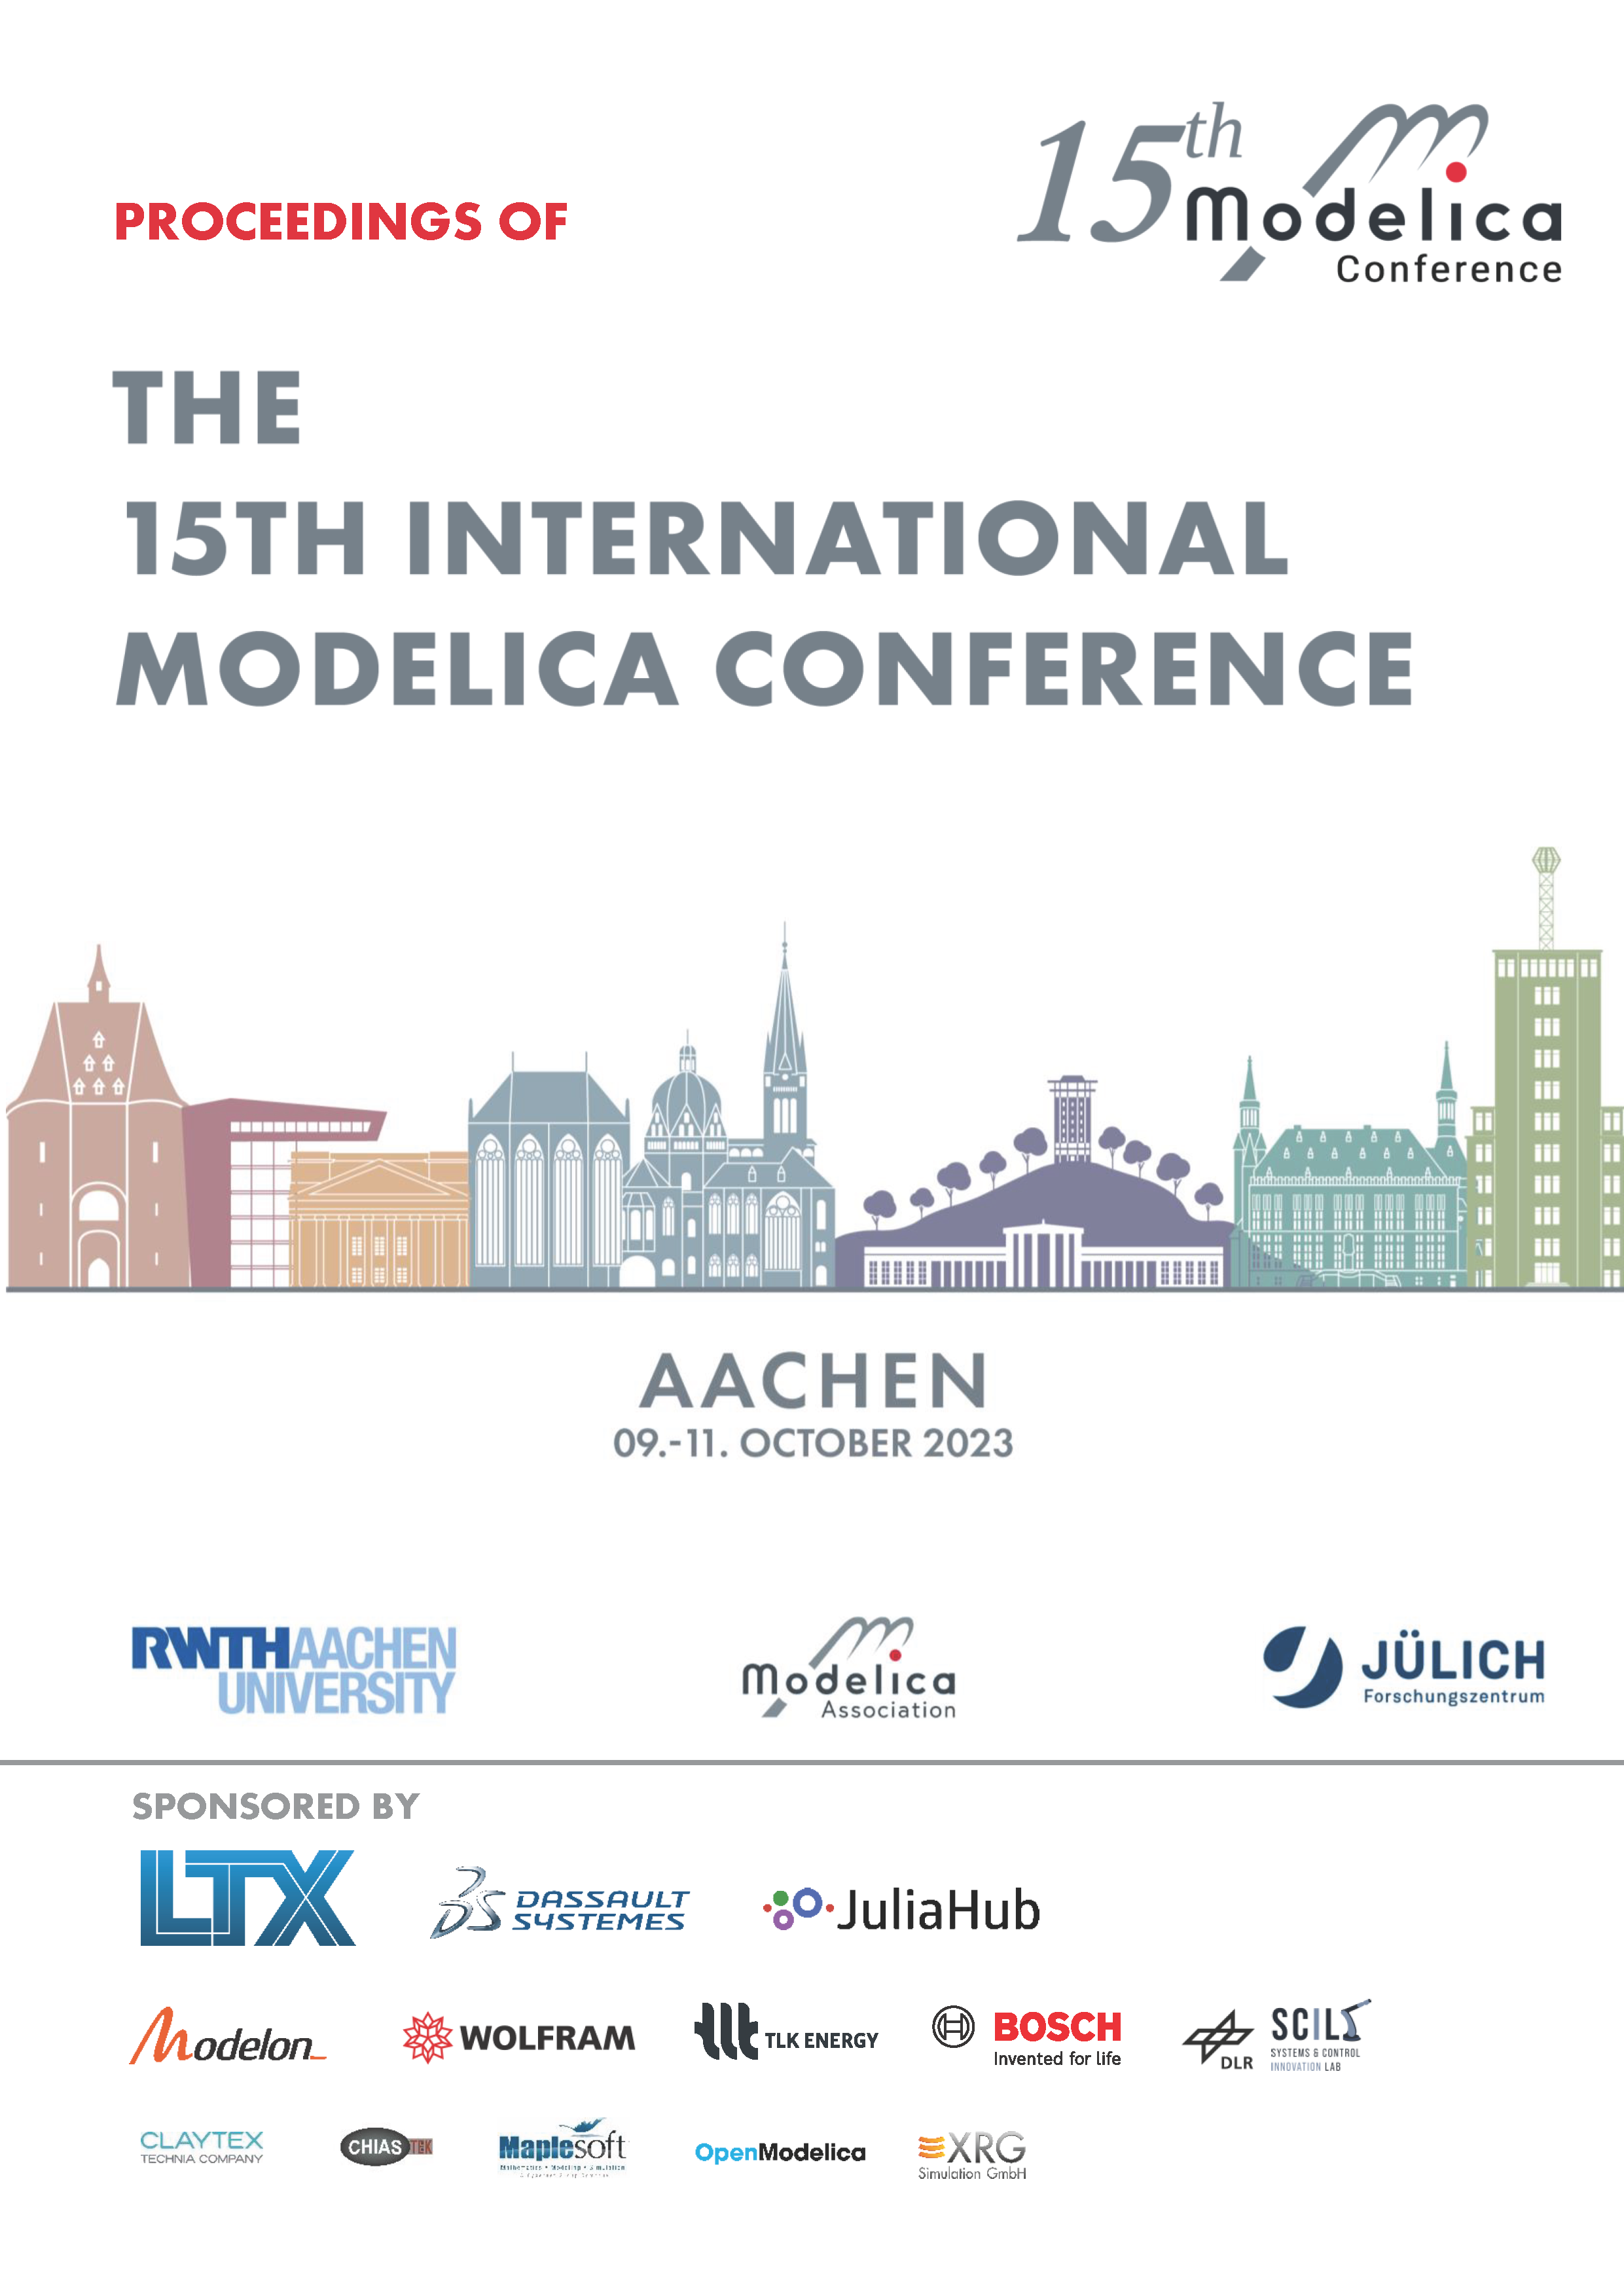 					View Proceedings of the 15th International Modelica Conference 2023, Aachen, October 9-11
				